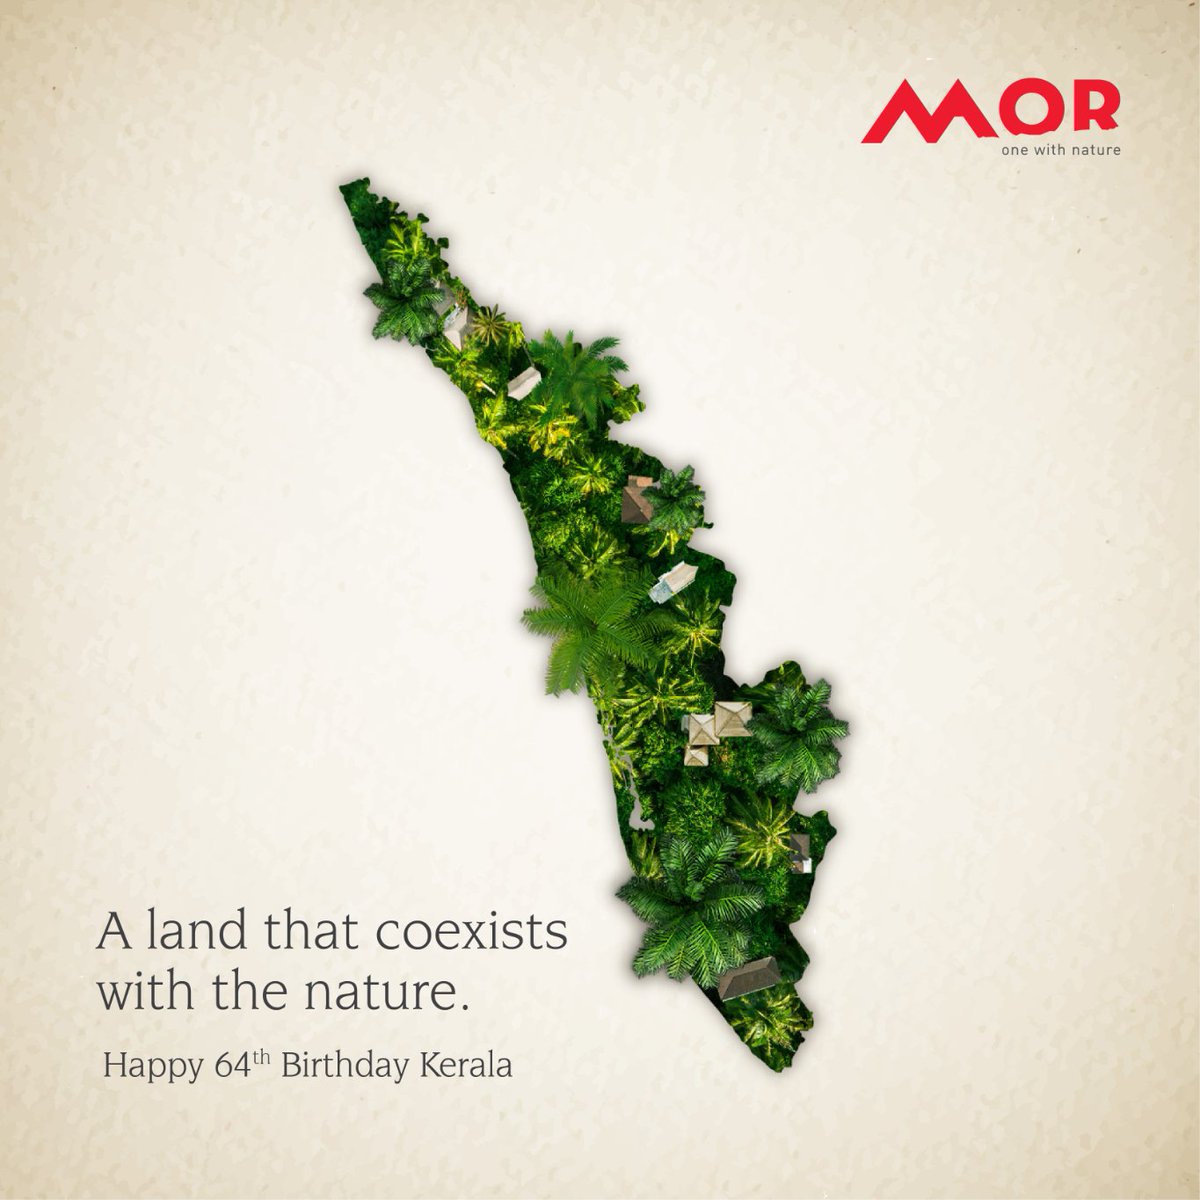 BIRTH OF A BEAUTIFUL STATE
Let's celebrate marvellous Kerala by protecting it's magnificent nature as it is. Kerala Piravi wishes to all Keralites. 
#morrealtors #newhome #ecofriendlyhomes #livetrue #naturelovers #happyliving #luxuryhomes #ecofriendlyliving  #luxurylifestyle